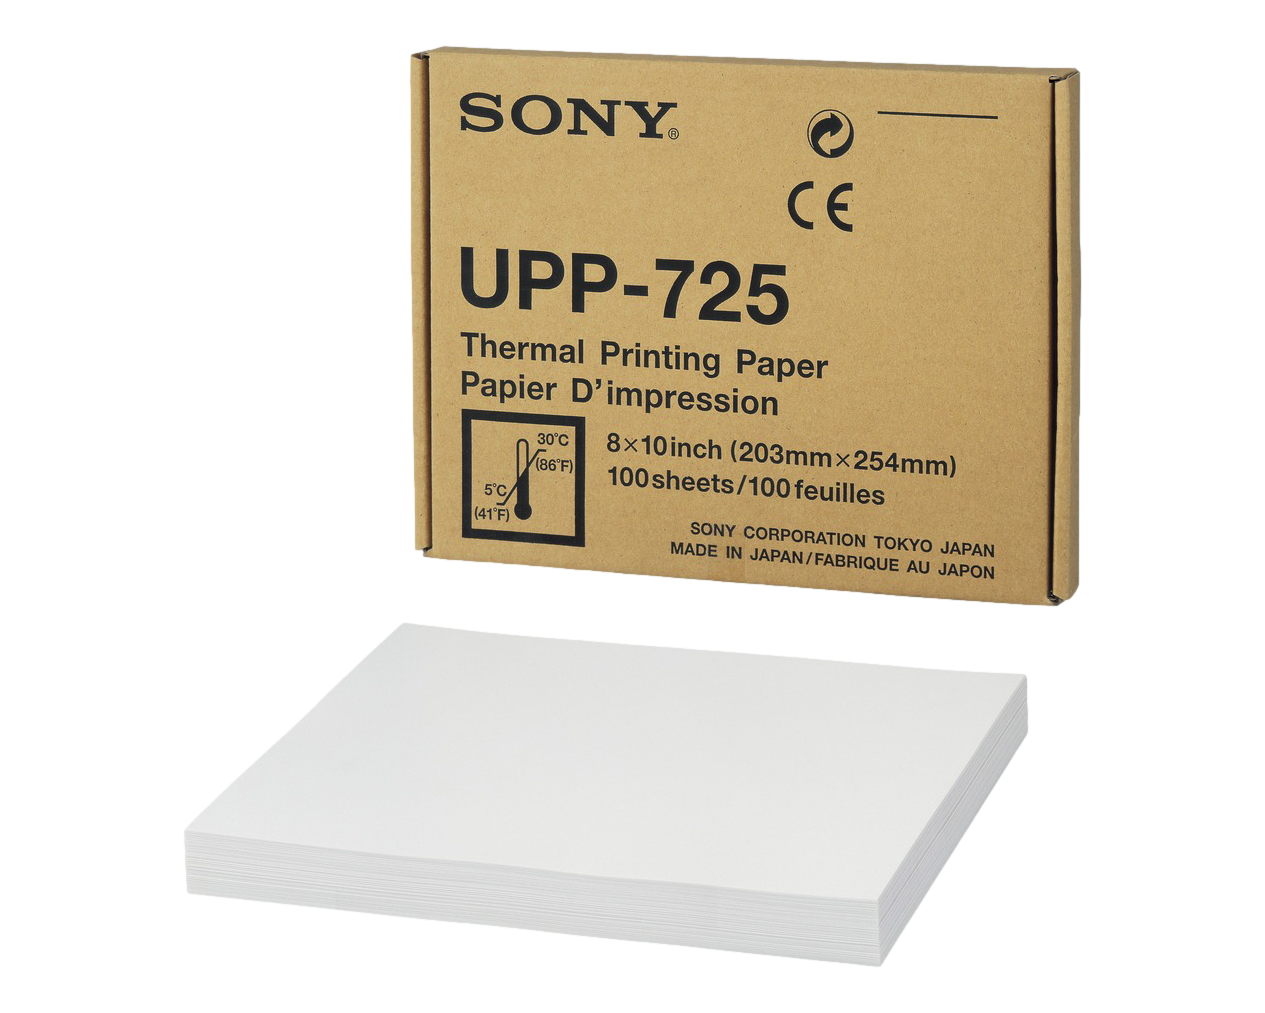 Sony UPP-725 superior quality thermal printing paper compatible with Sony printers